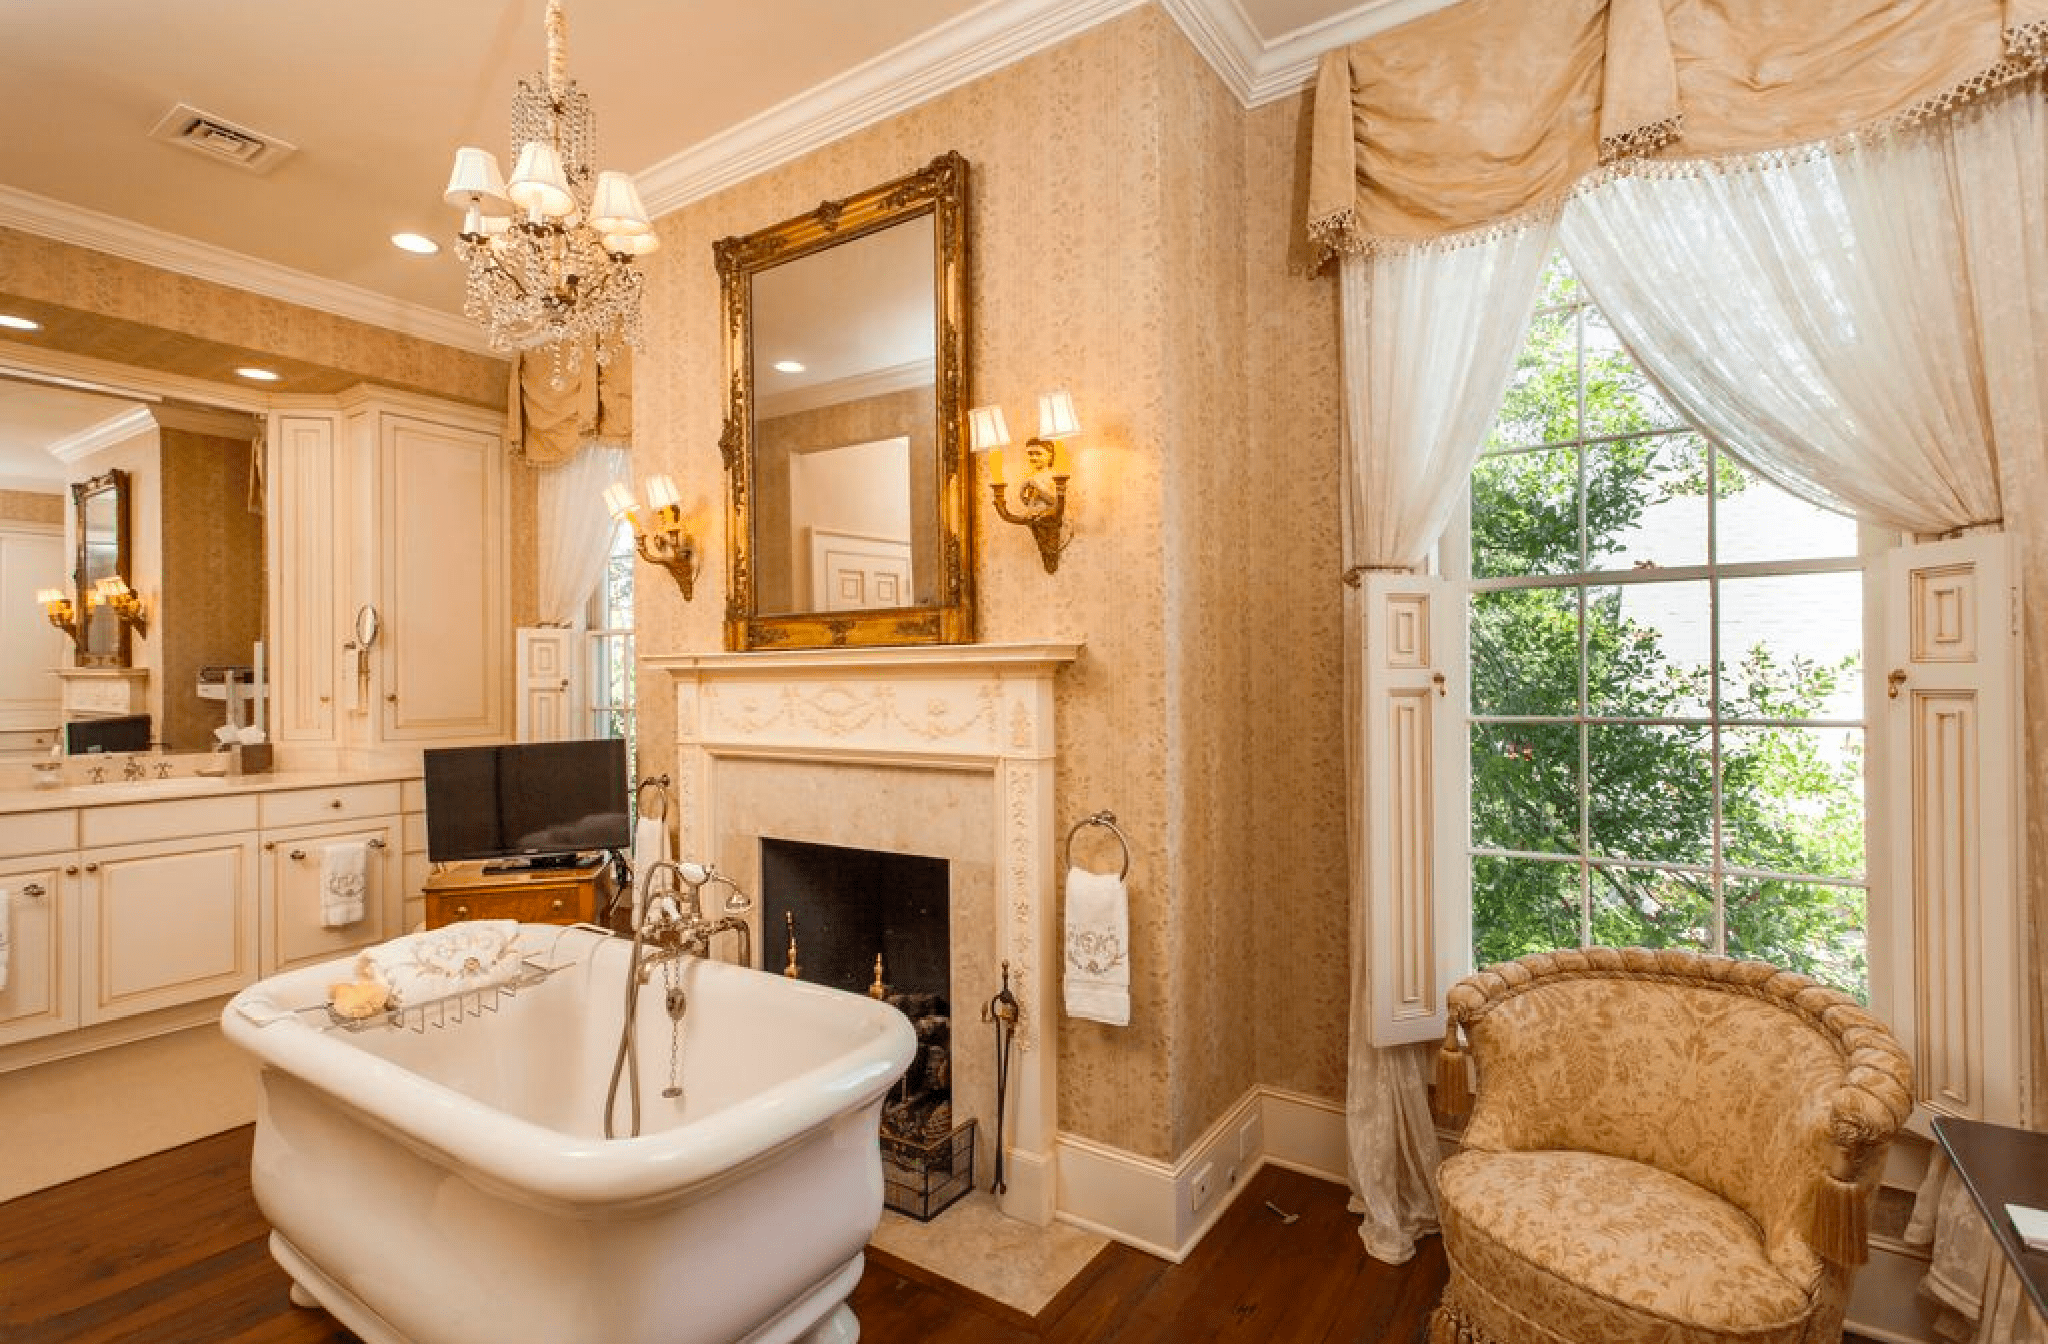 Historic home bathroom with fireplace